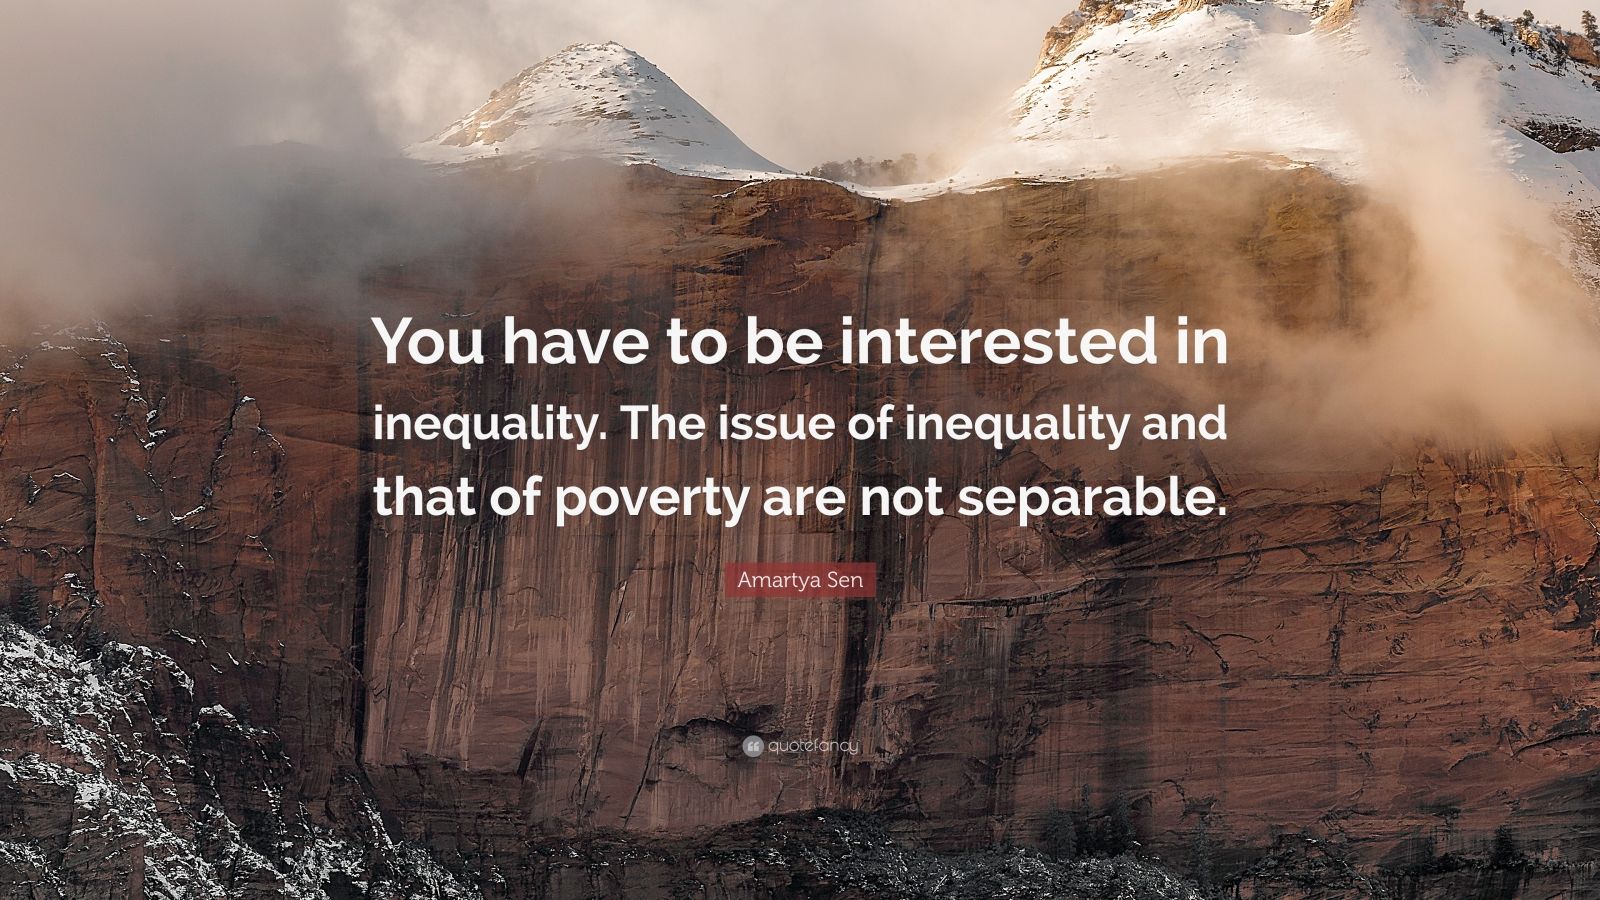 Amartya Sen Quote: "You have to be interested in inequality. The issue of inequality and that of ...